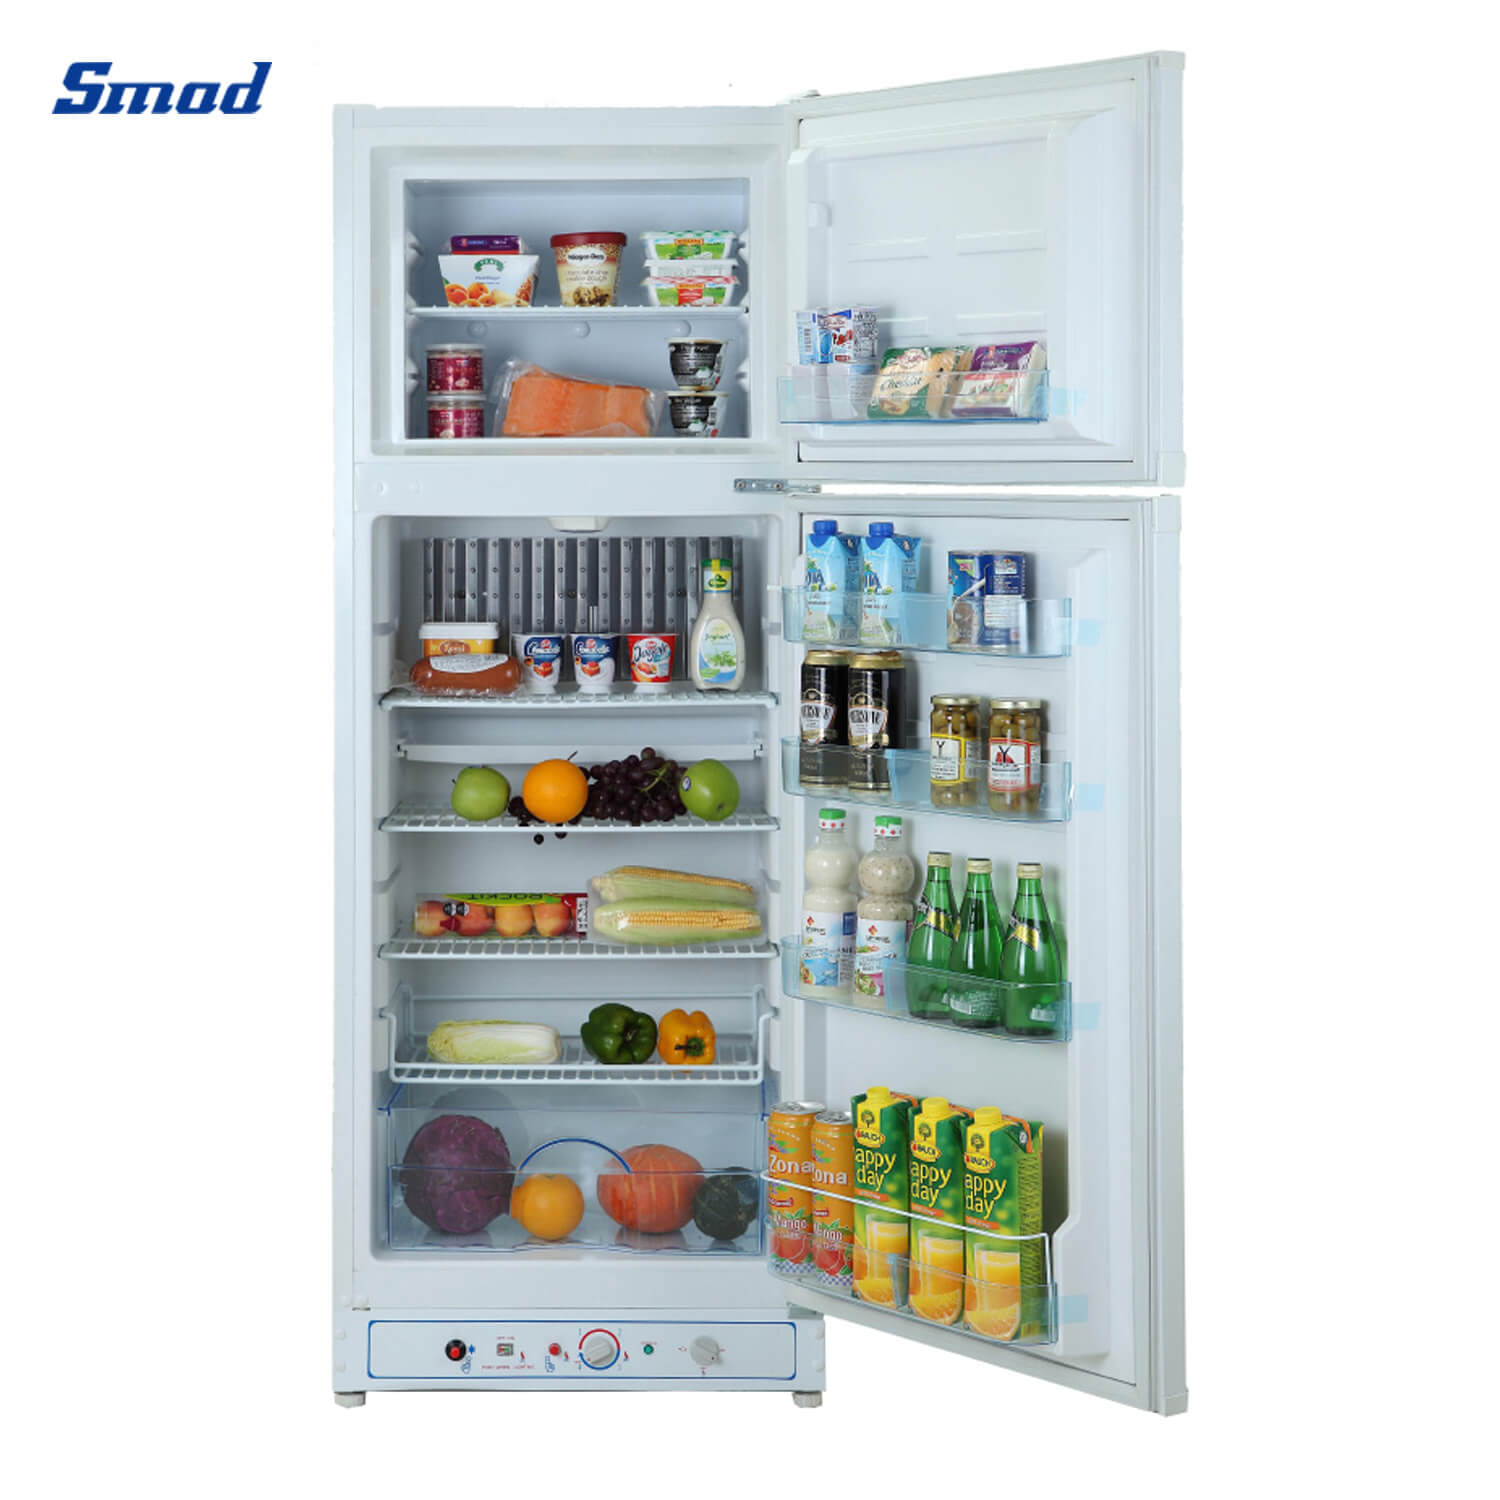 Smad 225L LPG Gas Double Door Absorption Refrigerator with Excellent Refrigeration Performance